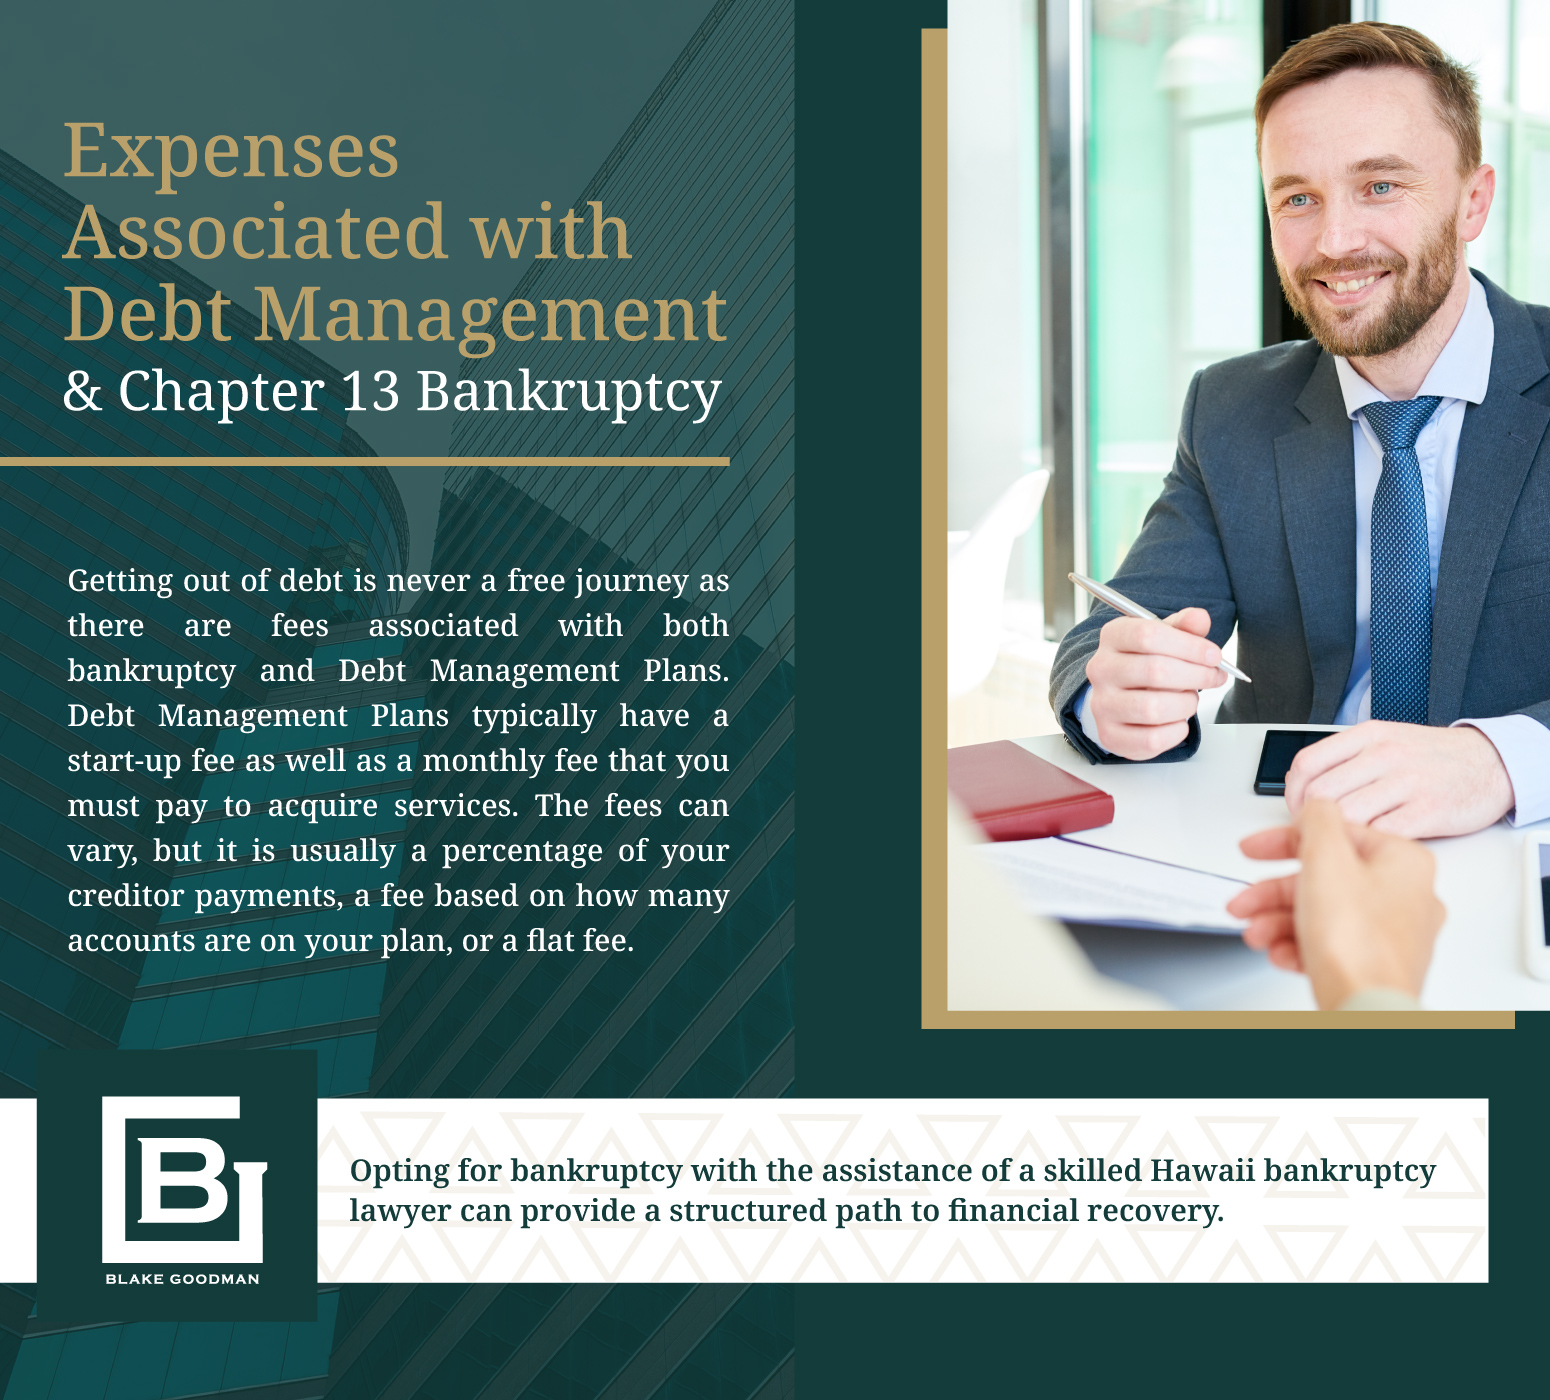 An infographic that explains about the expenses associated with debt management